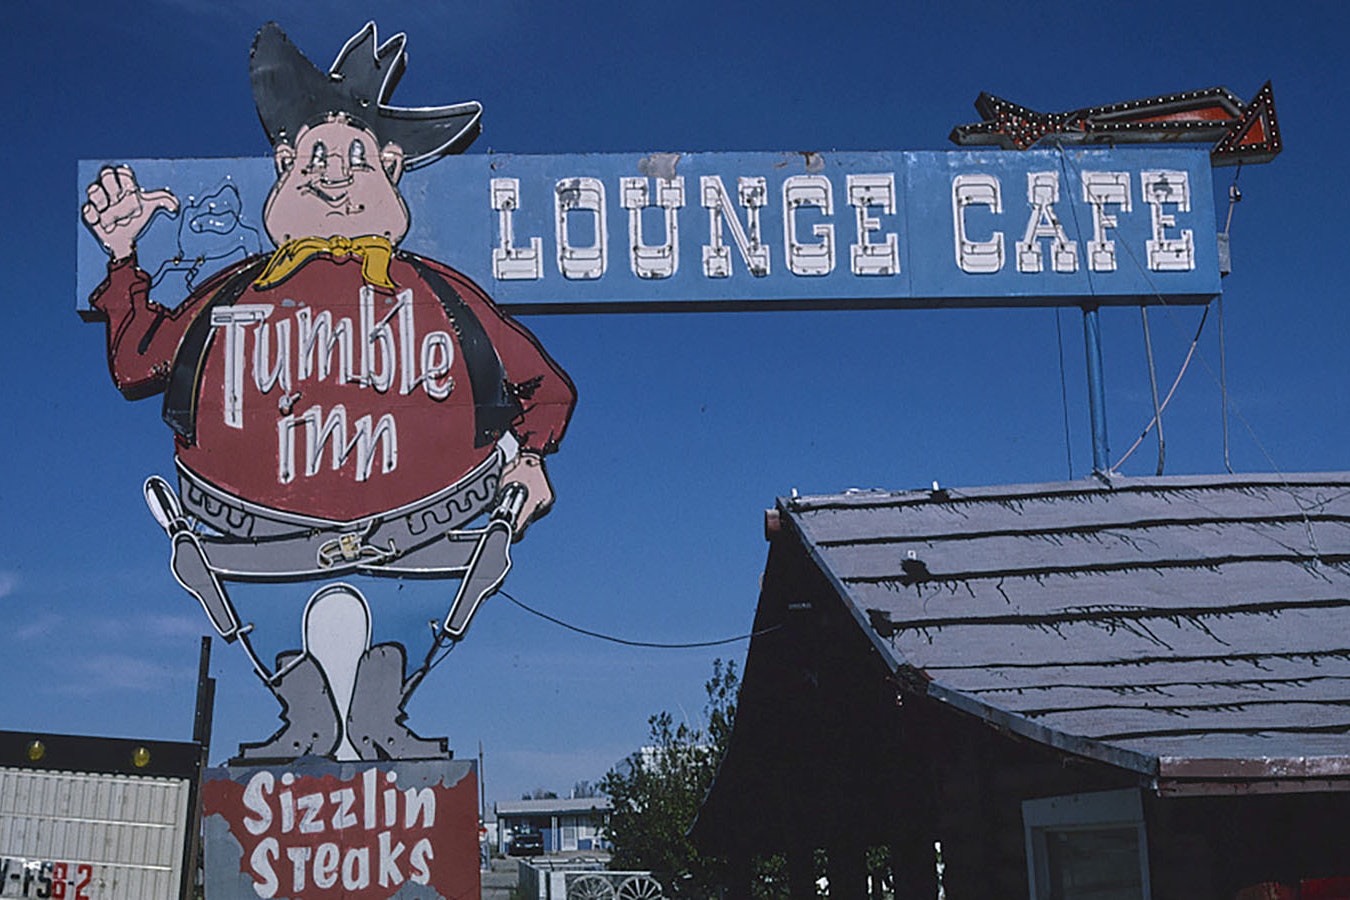 Tumble Inn as seen in the John Margolies Roadside America photograph archive in the Library of Congress.